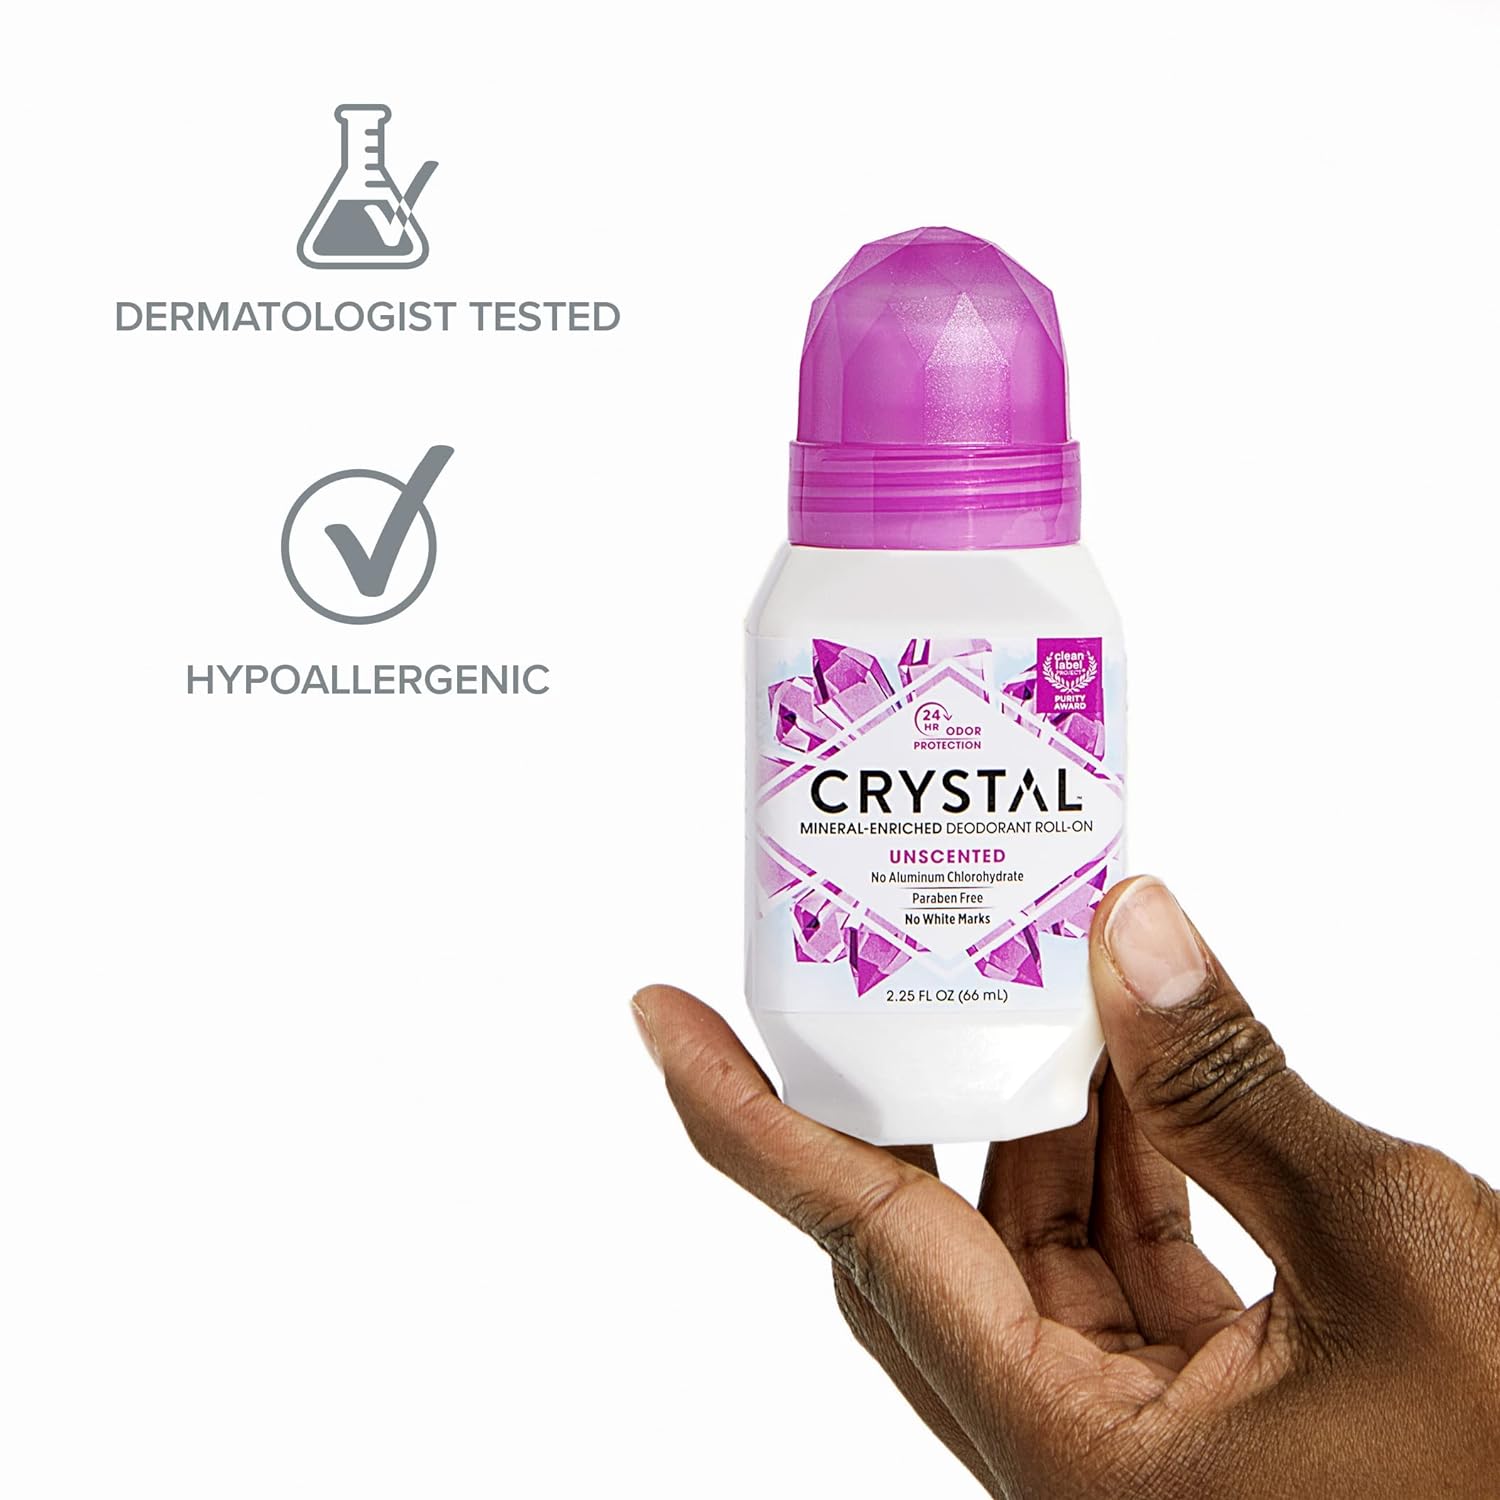 CRYSTAL Mineral Deodorant Roll-On Unscented Body Deodorant With 24-Hour Odor Protection, Aluminum Chloride & Paraben Free, 2.25 FL OZ (Packaging May Vary) : Life Stinks Deodorant : Beauty & Personal Care